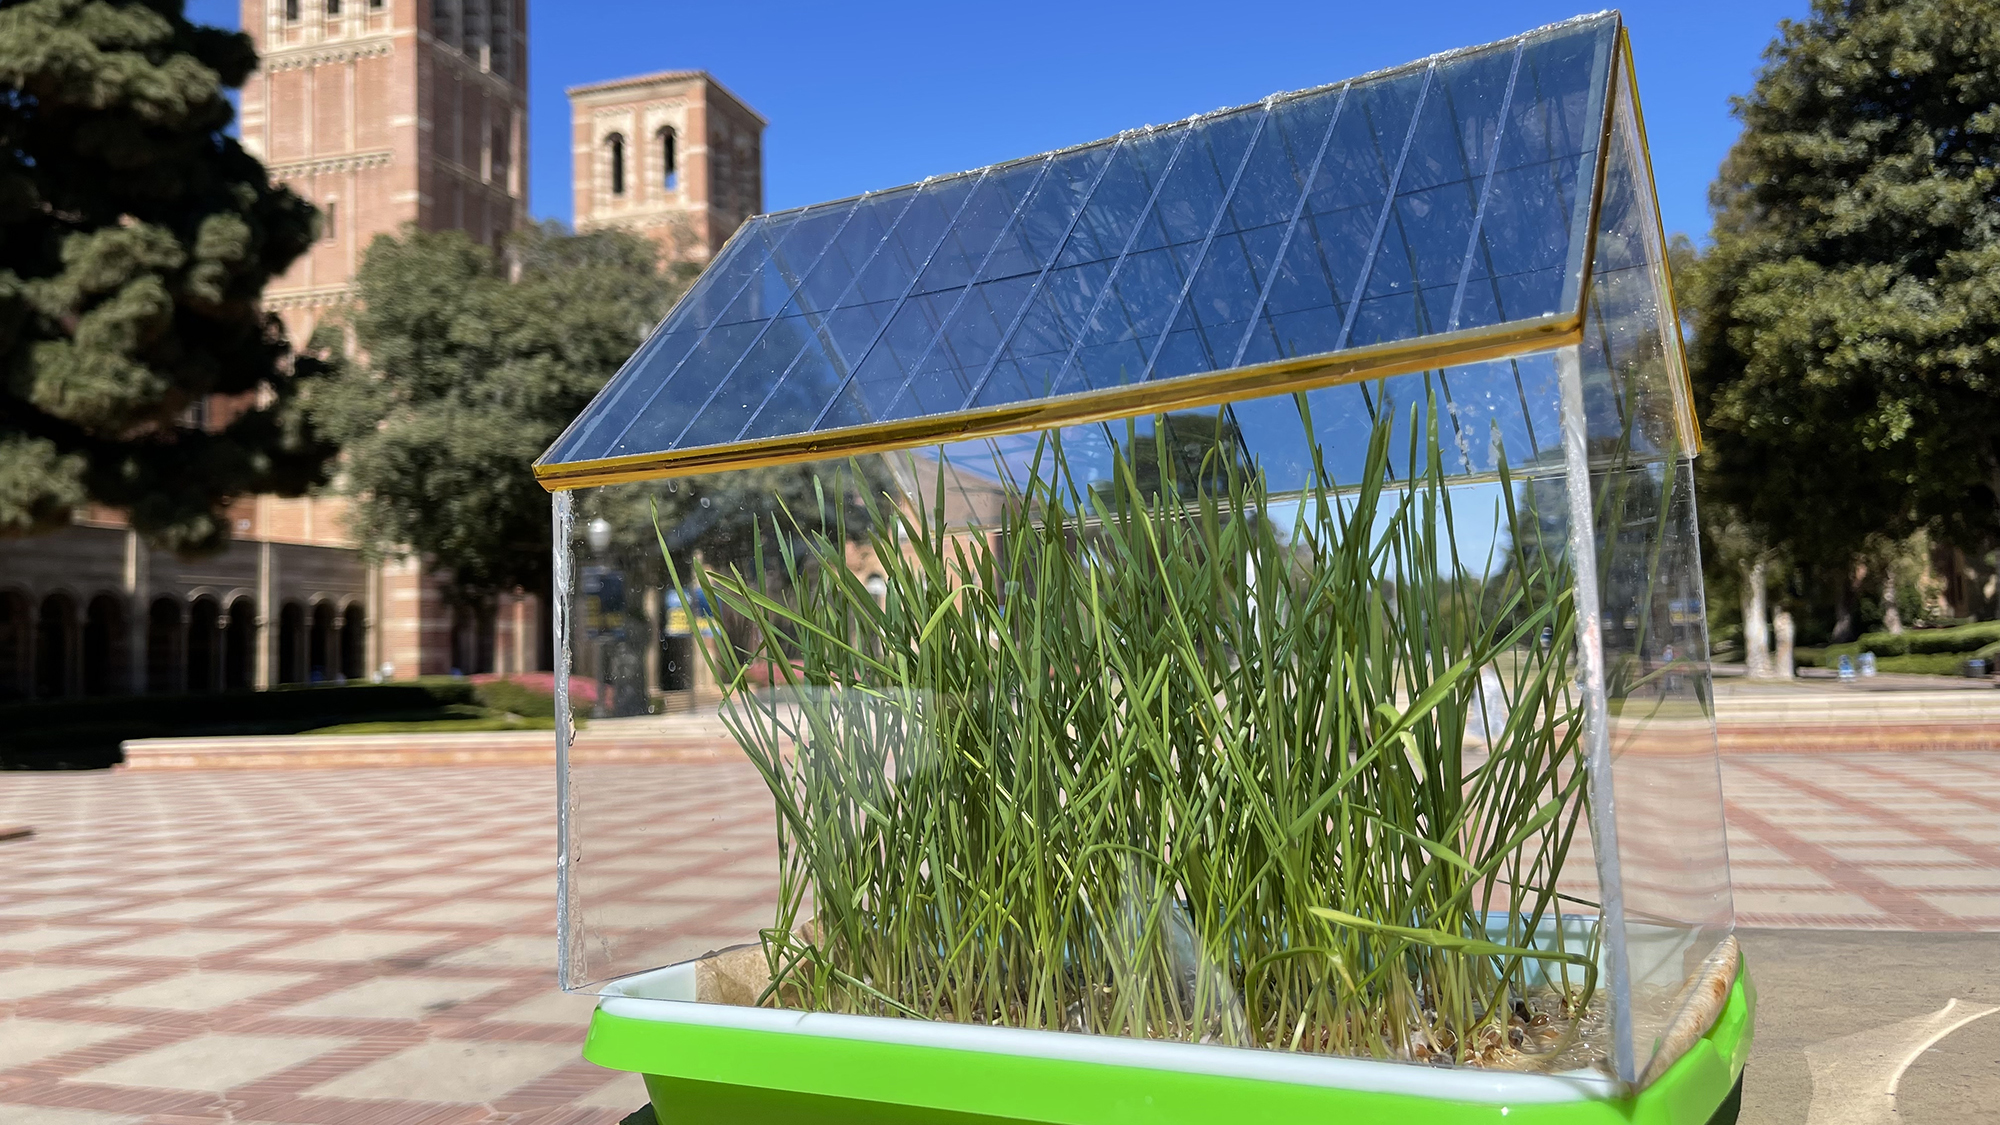 Scientists think this tiny greenhouse could be a game changer for agrivoltaics